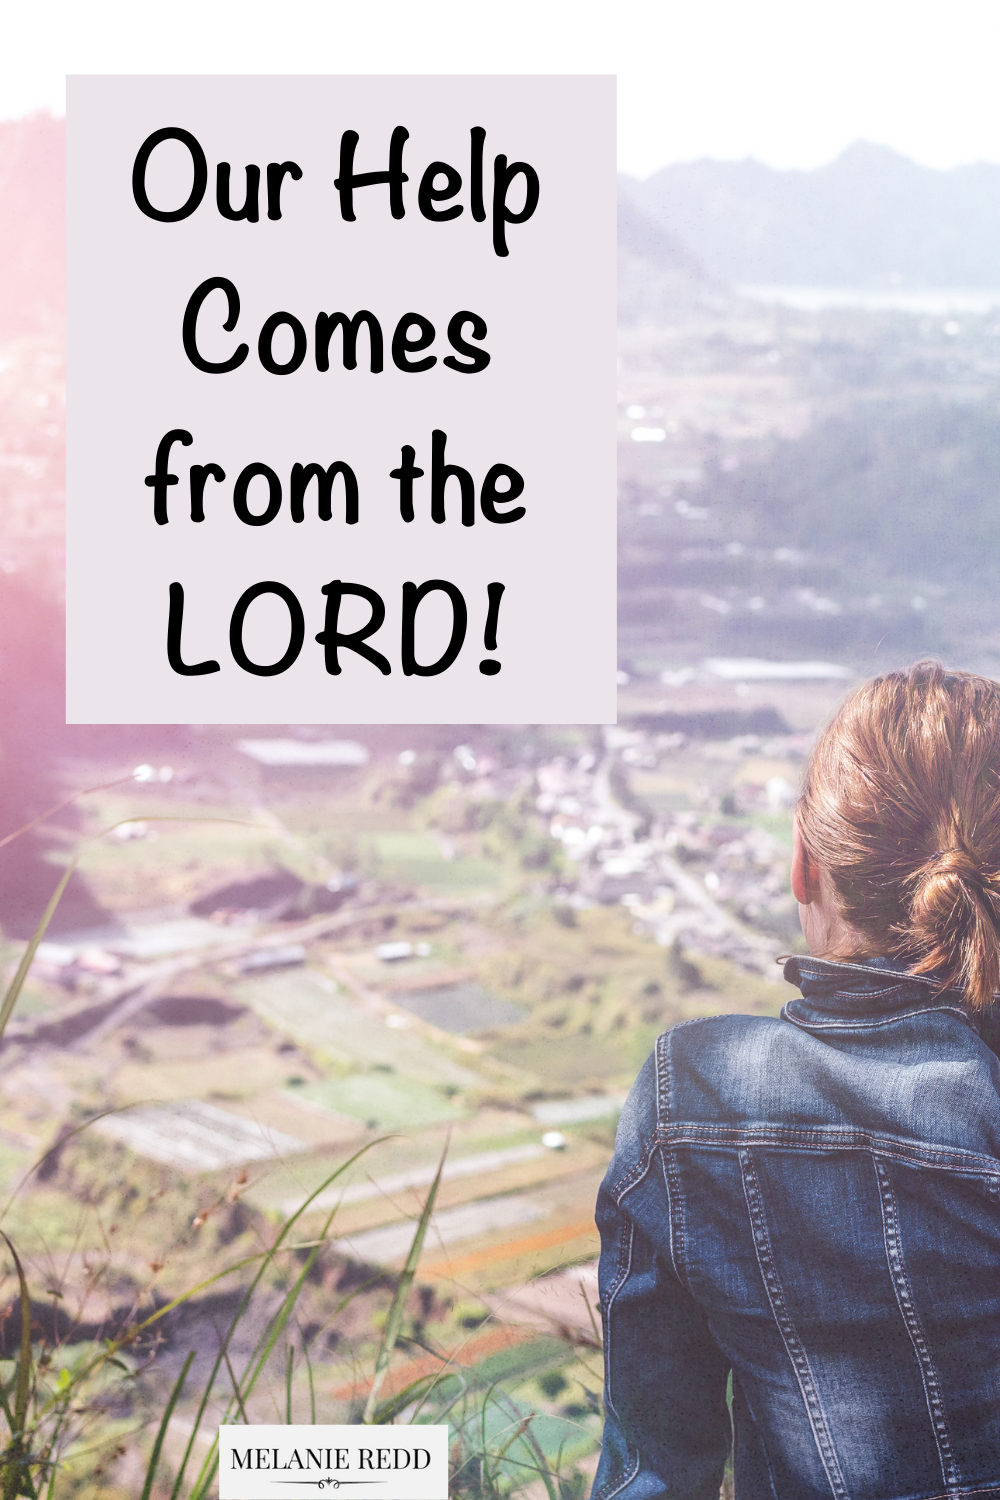 We are living in the strangest days! Such unrest! Here are 5 of the best places to look right now. (Our help comes from the Lord!) #hope #helpcomes #fromthelord